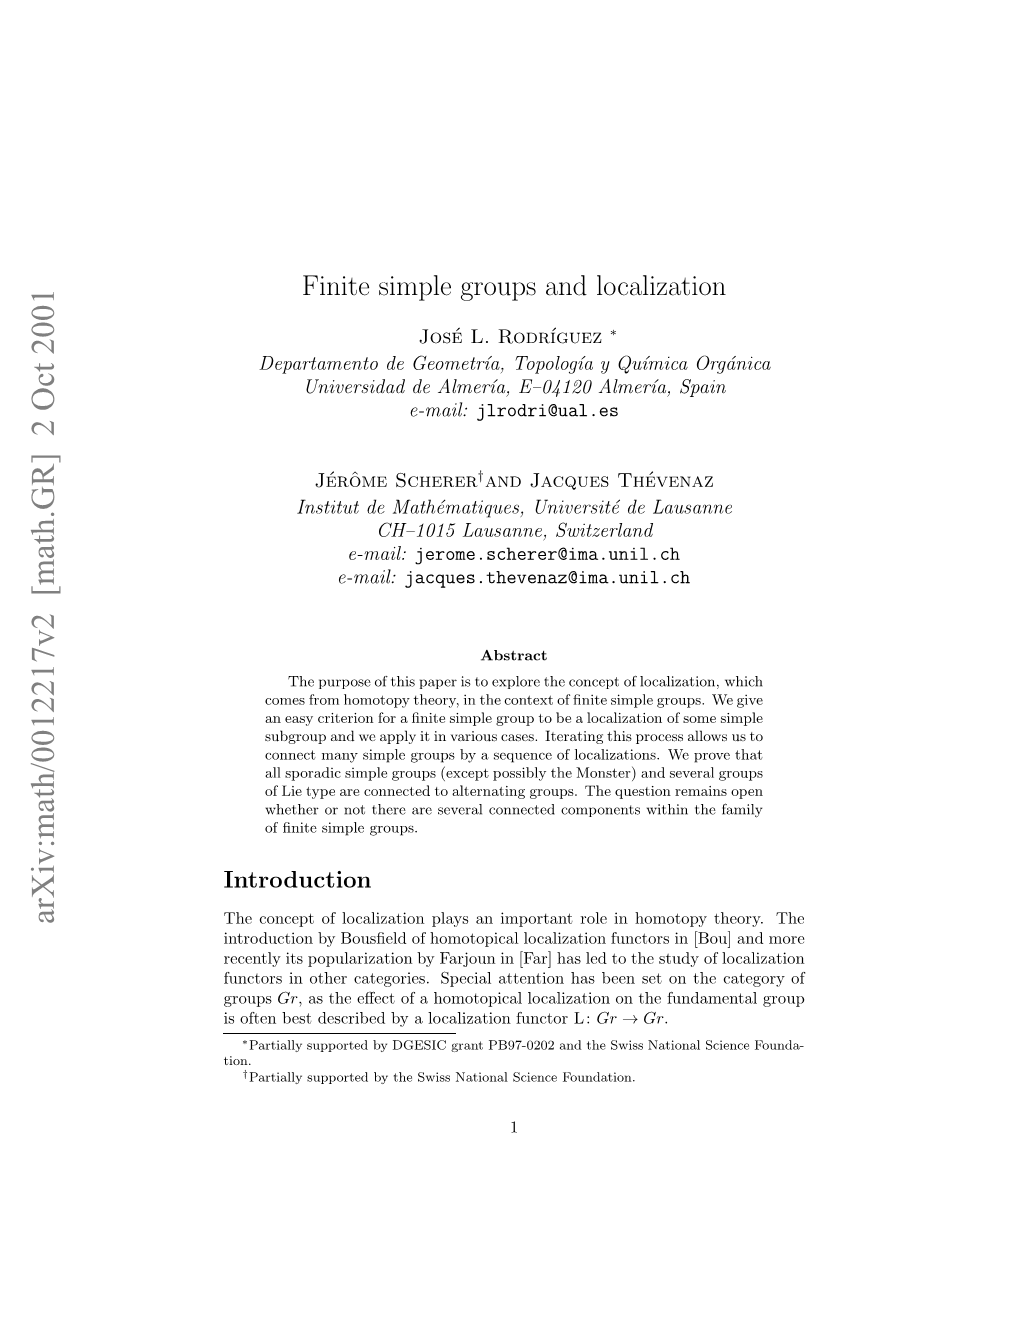 Finite Simple Groups and Localization